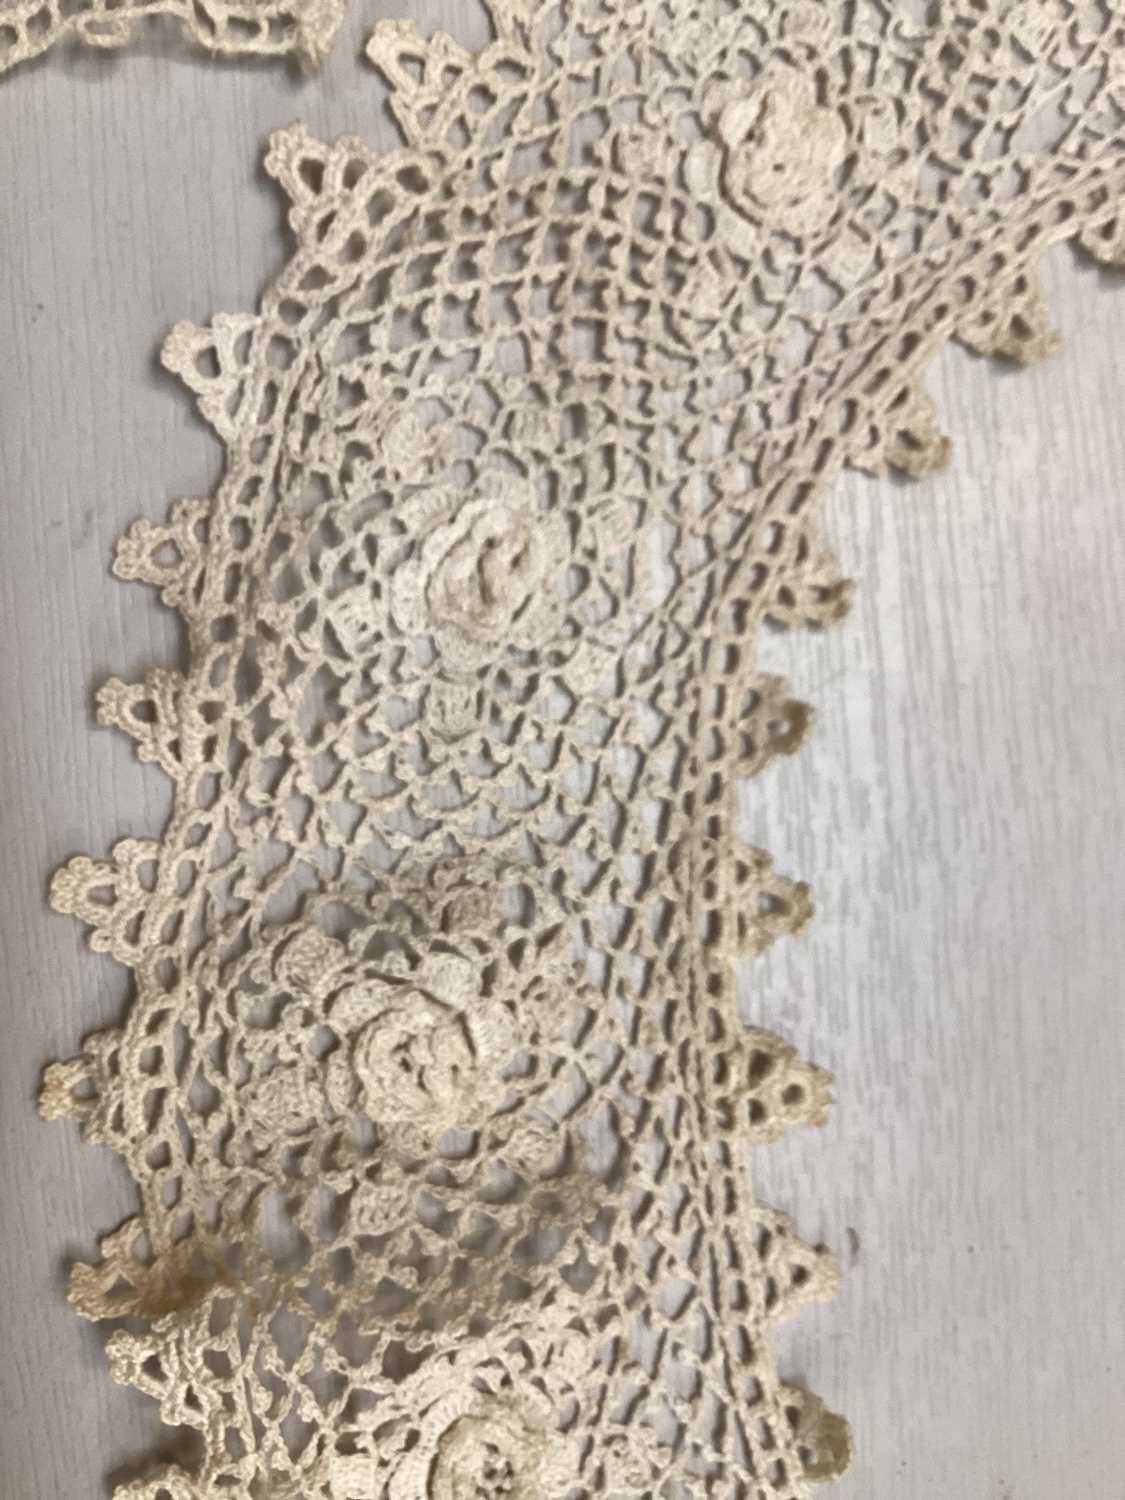 Selection of lace items including collars and cuffs, bobbin lace, blonde lace , metallic thread lace - Image 4 of 12